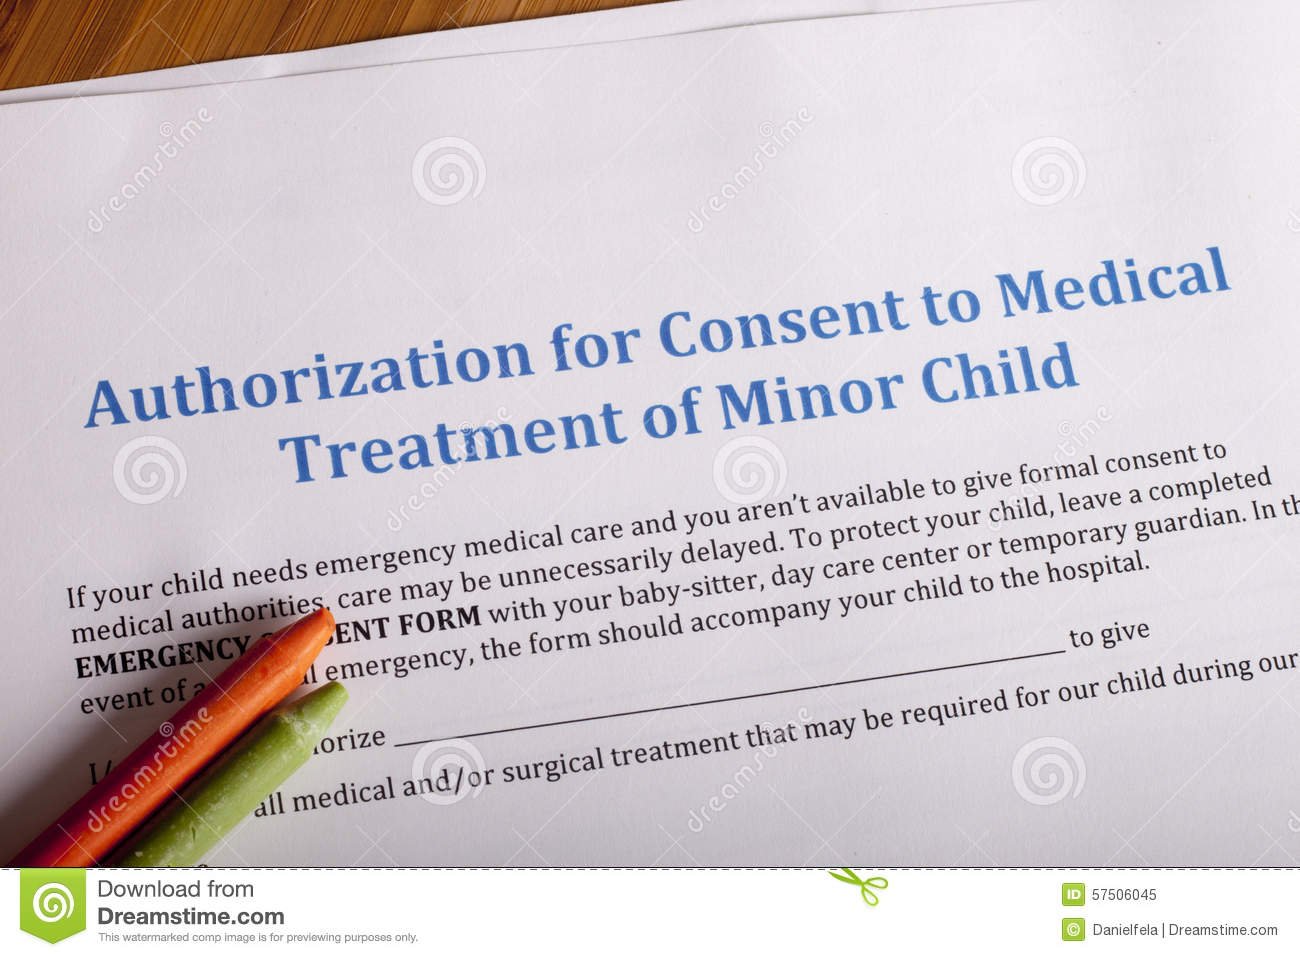 AUTHORIZATION TO CONSENT TO HEALTH CARE FOR MINOR